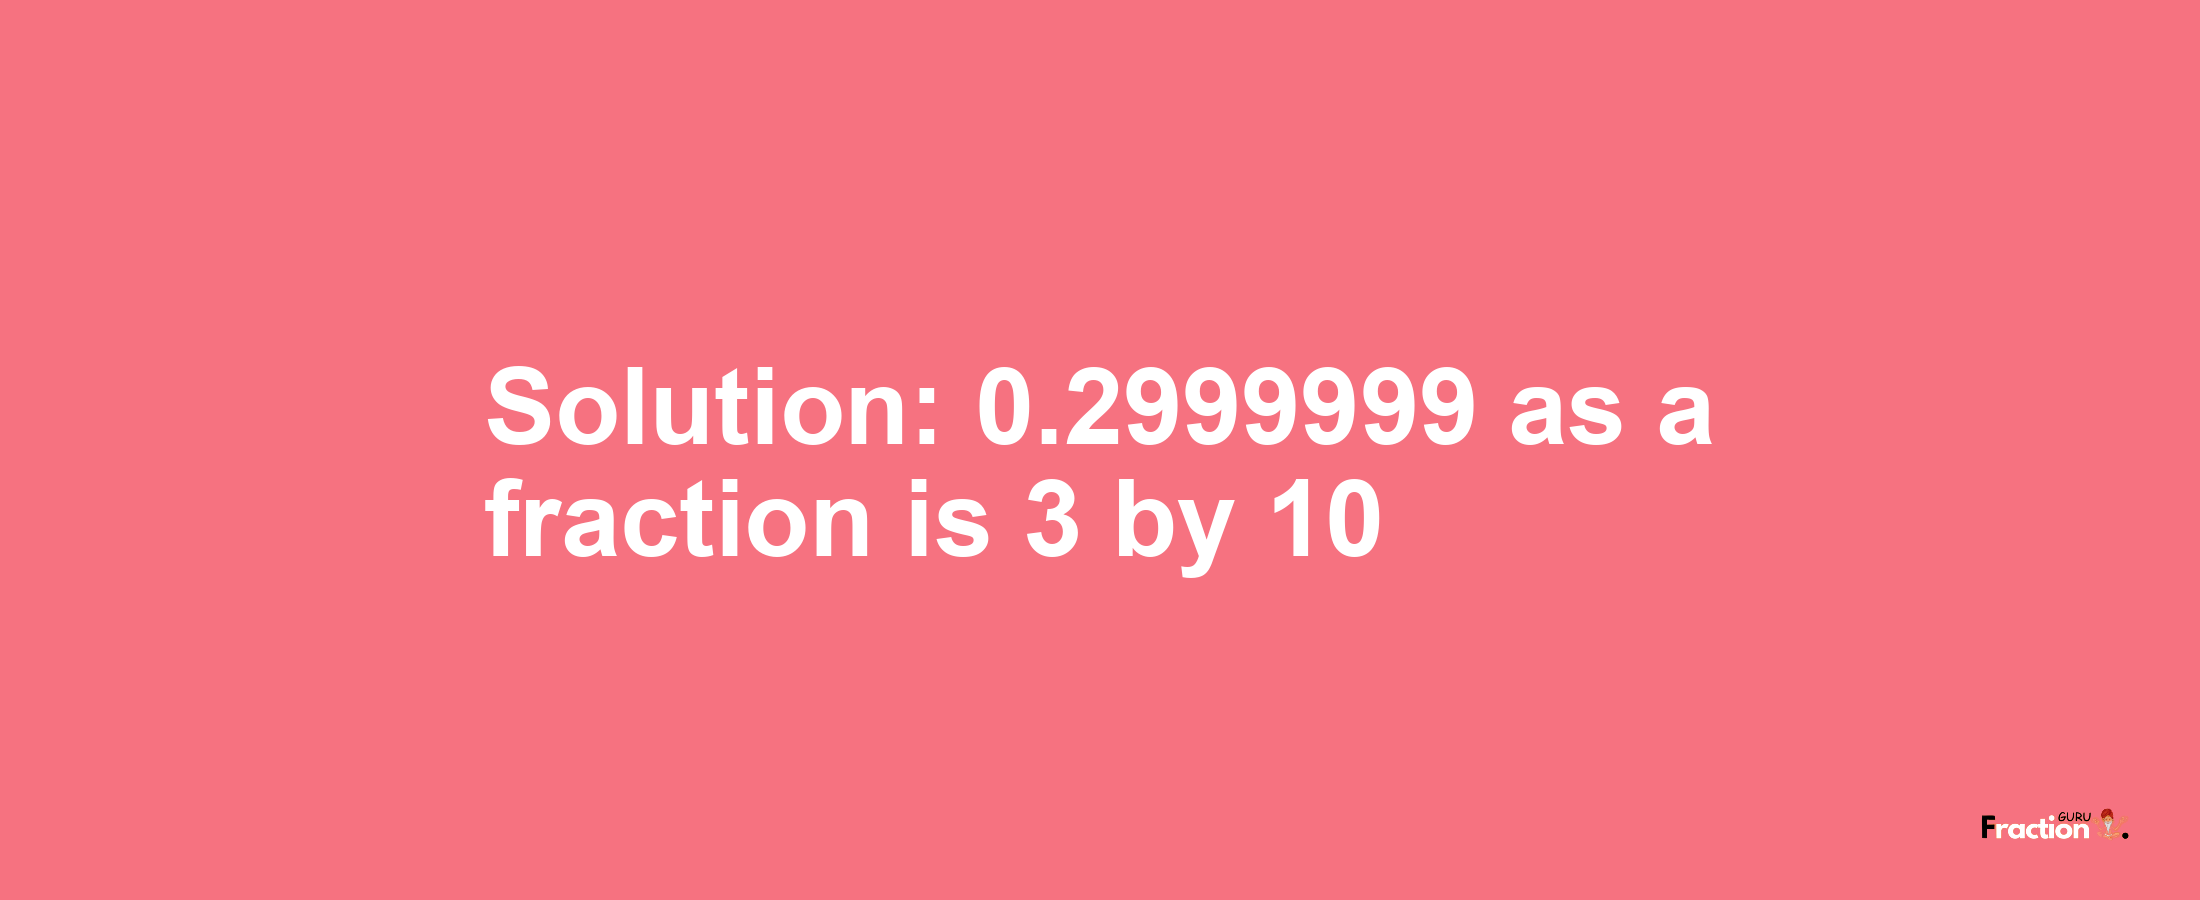 Solution:0.2999999 as a fraction is 3/10